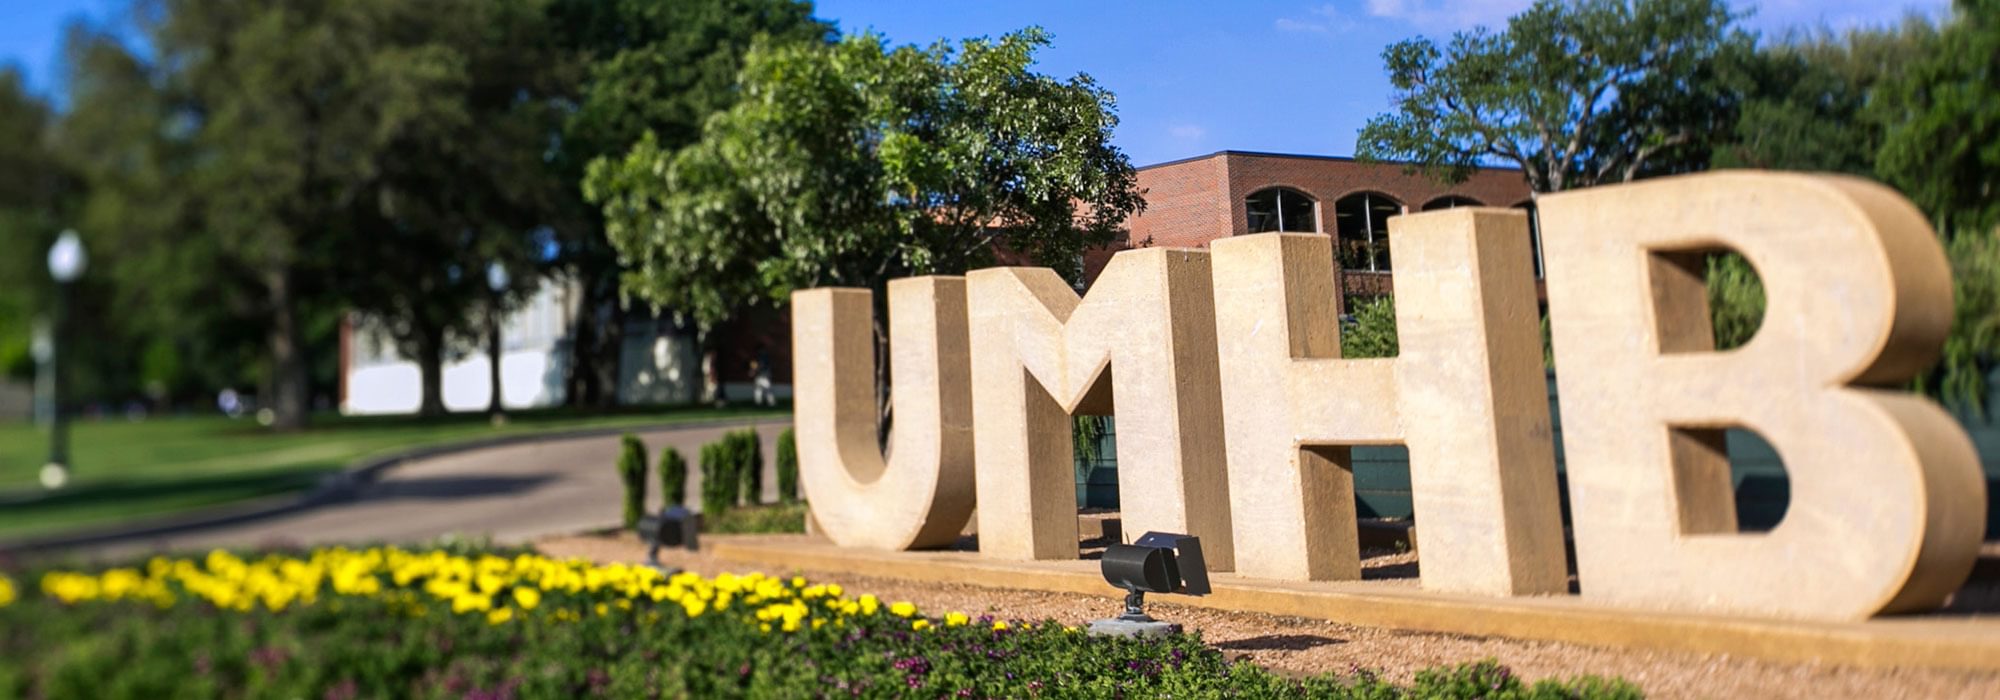 UMHB Music Department to Host Piano Sale This Week